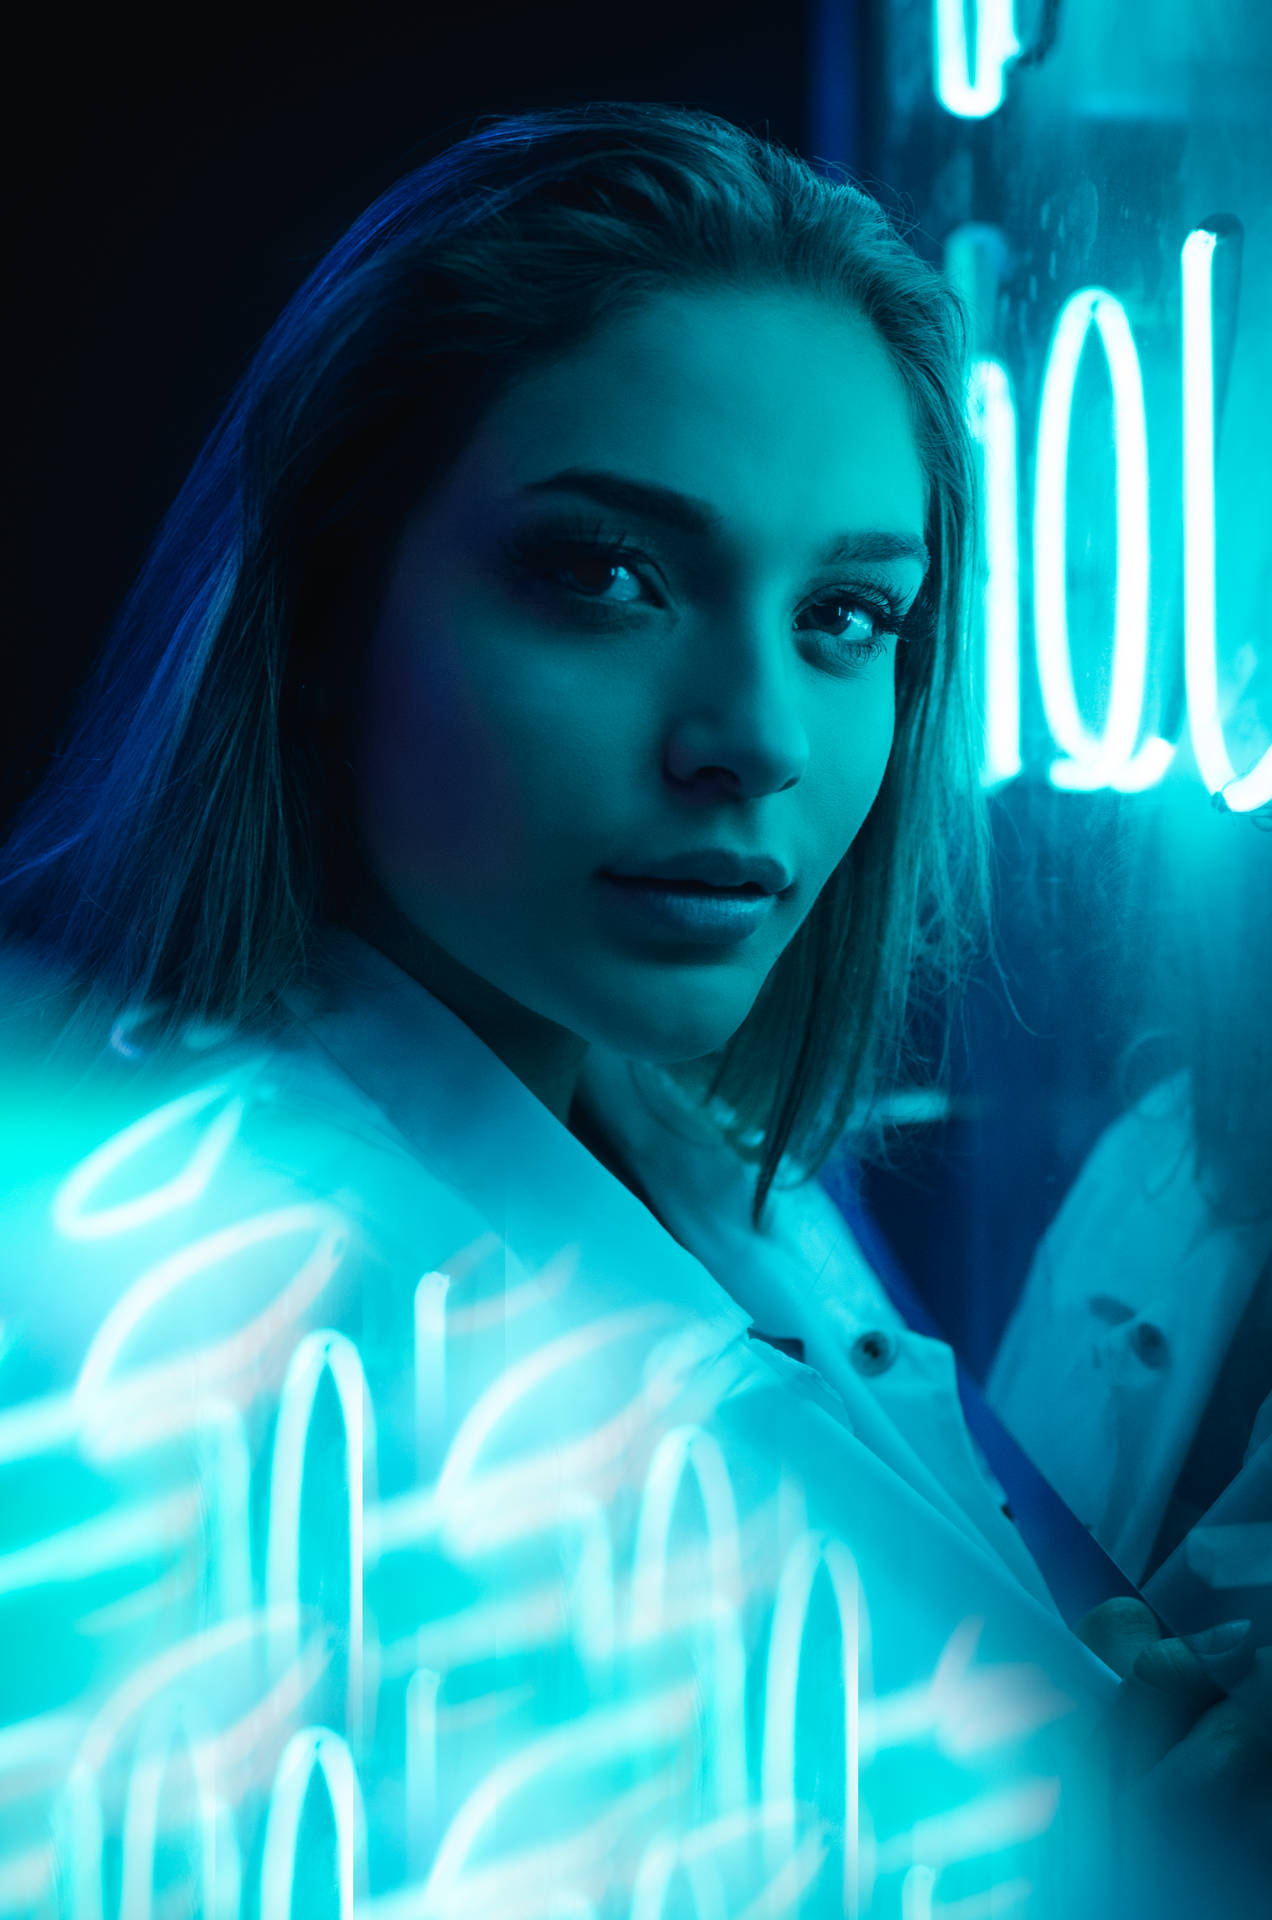 A Vibrant Display Of Neon Lights In The City Night Wallpaper